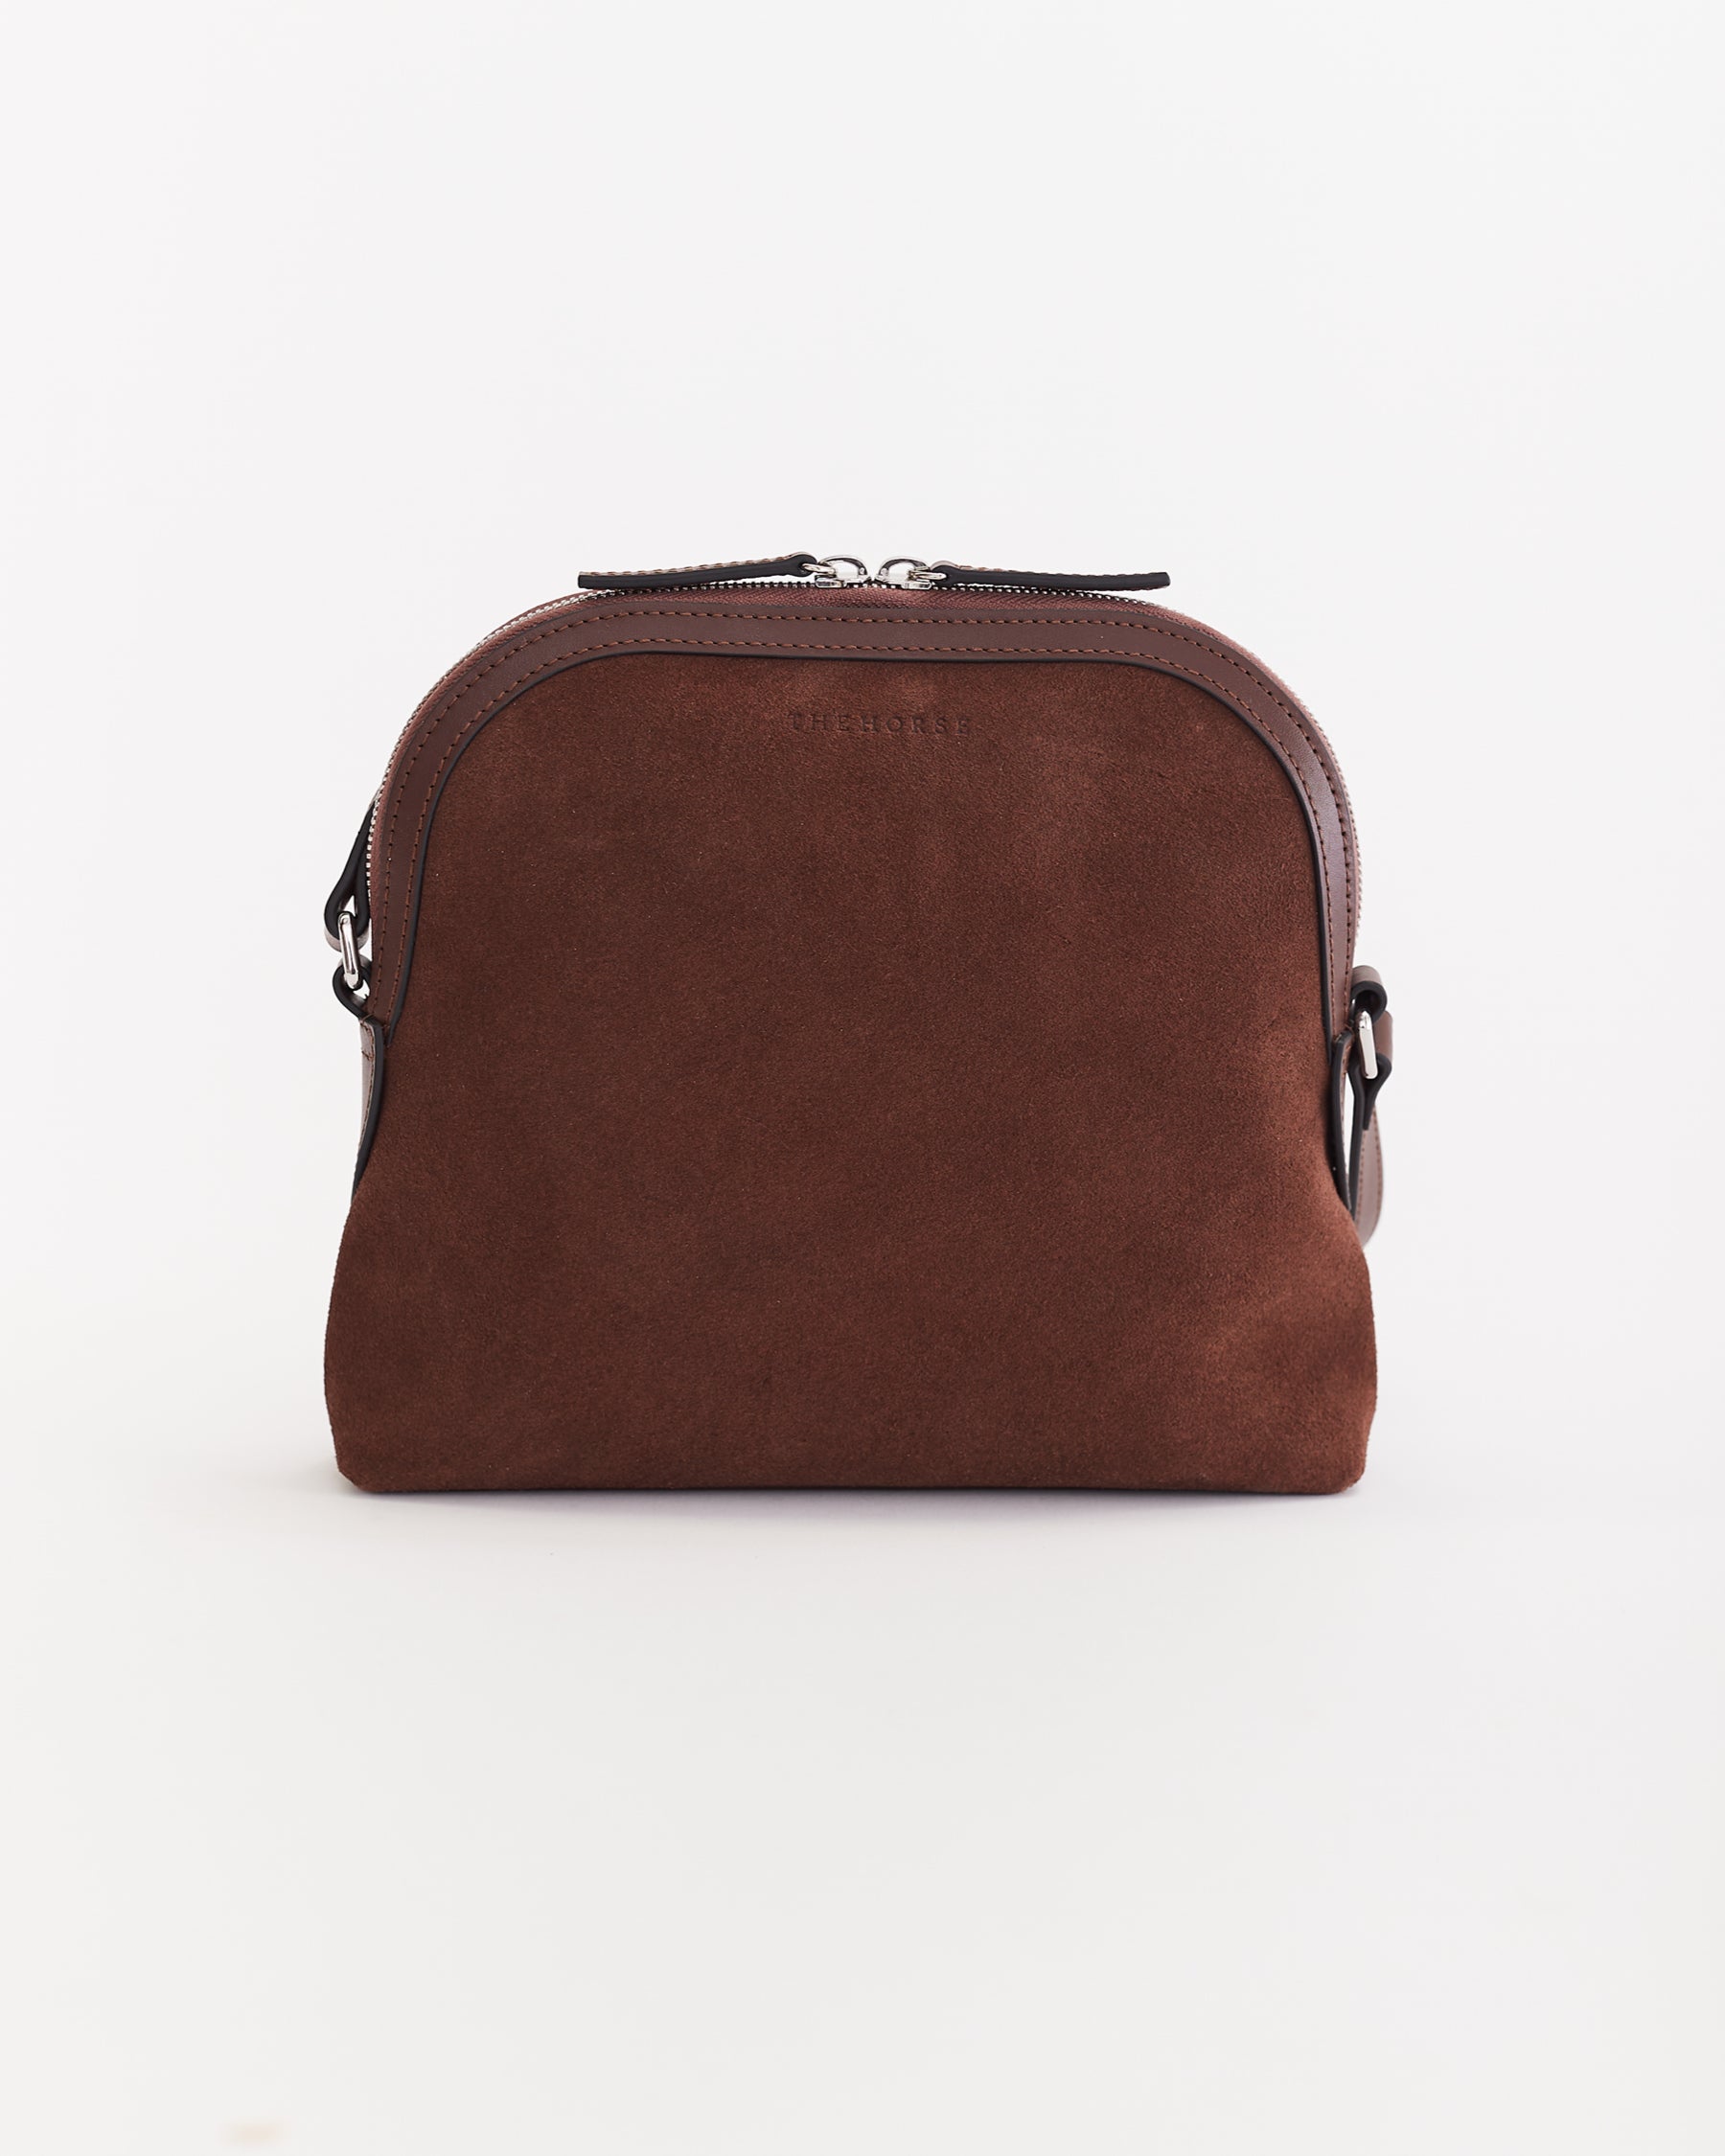 Large Dome Bag: Coffee Suede